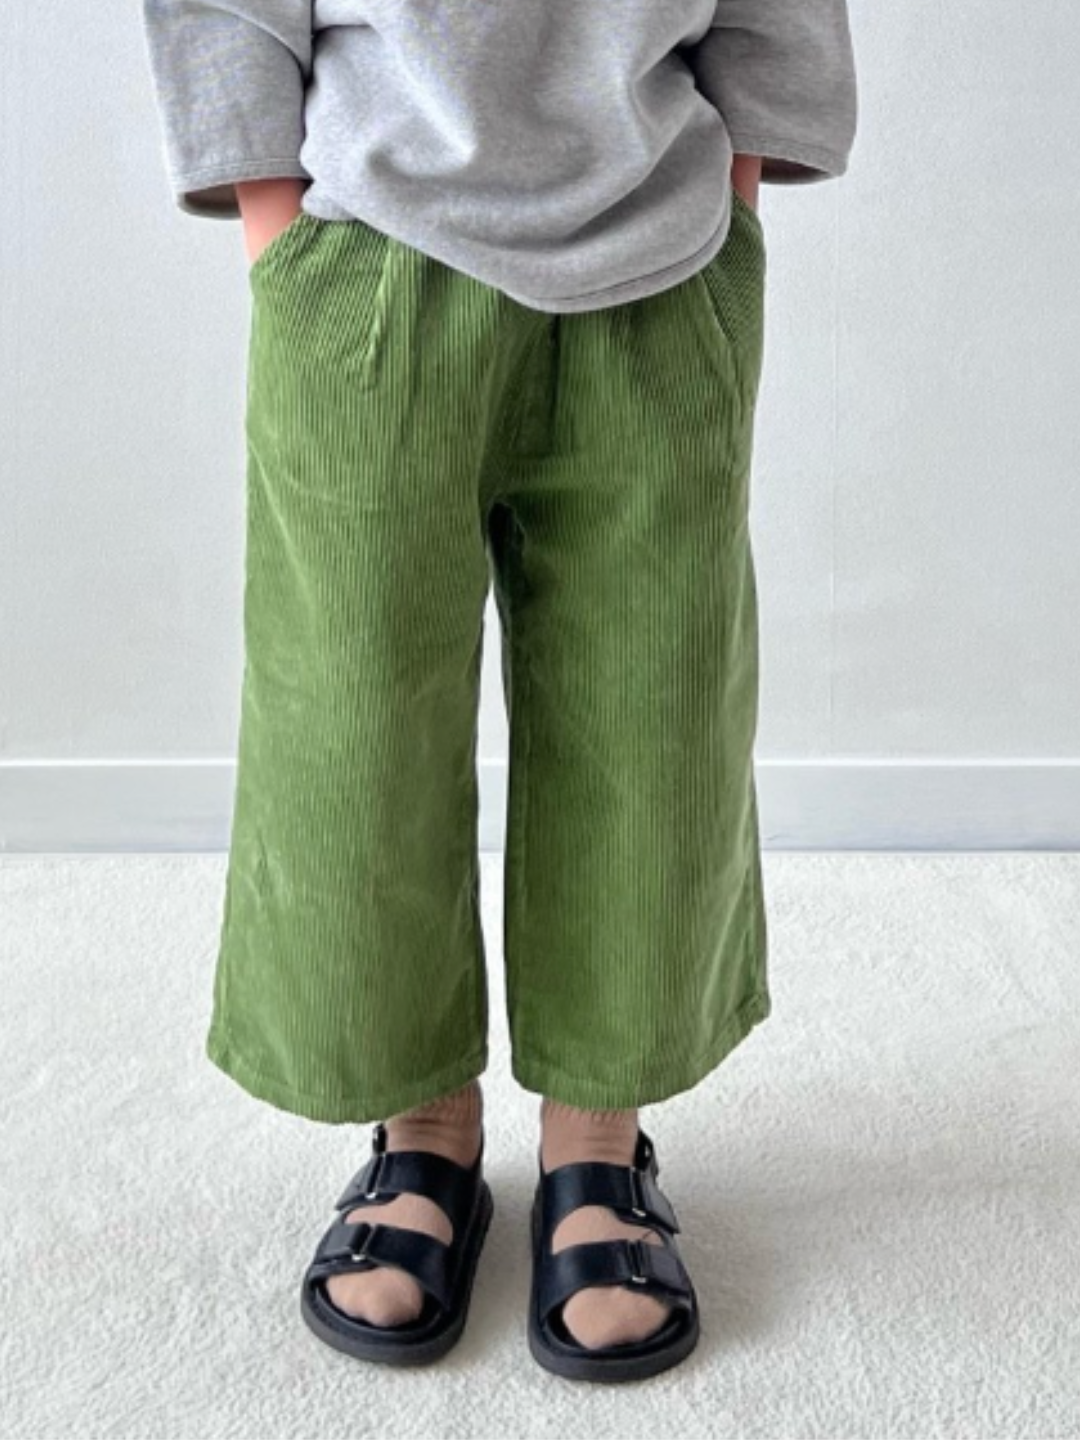 A waist-down cropped image of a child wearing wide-leg corduroy pants in moss green, worn with a grey sweatshirt, beige socks, and black sandals. The child is standing on grey carpet in front of a white wall, with hands in pockets.